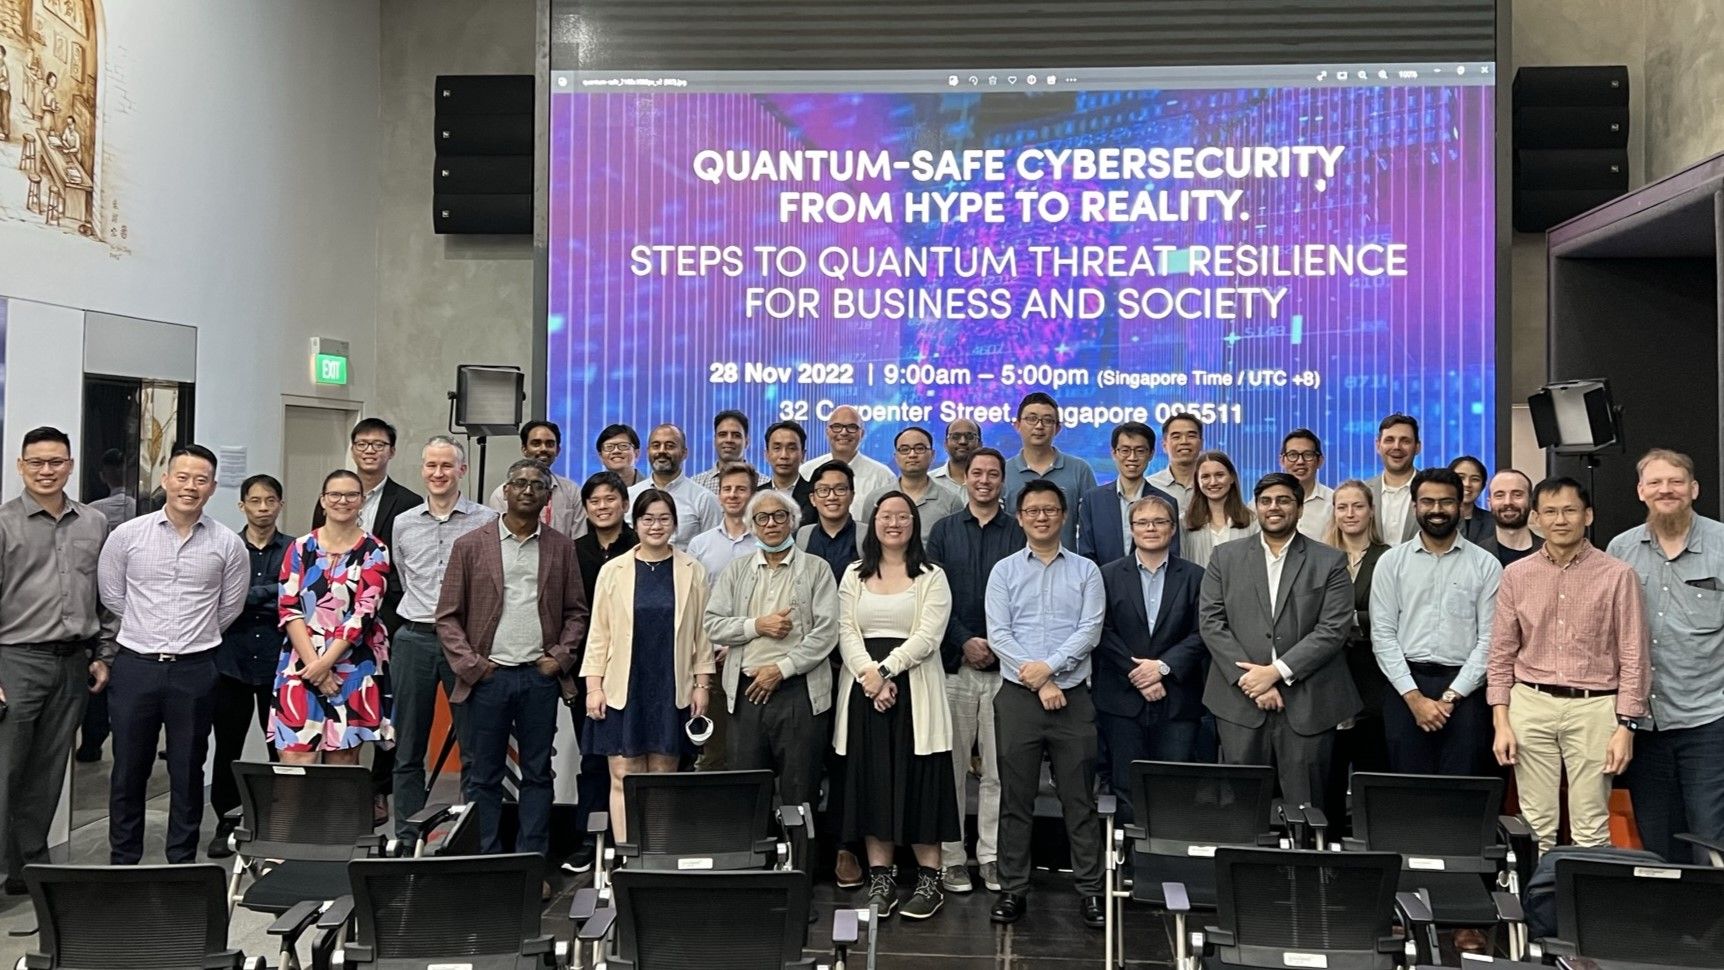 Group photo of delegates at event in front of slide with workshop title "Quantum-Safe Cybersecurity from Hype to Reality-Steps to Quantum Threat Resilience for Business and Society"